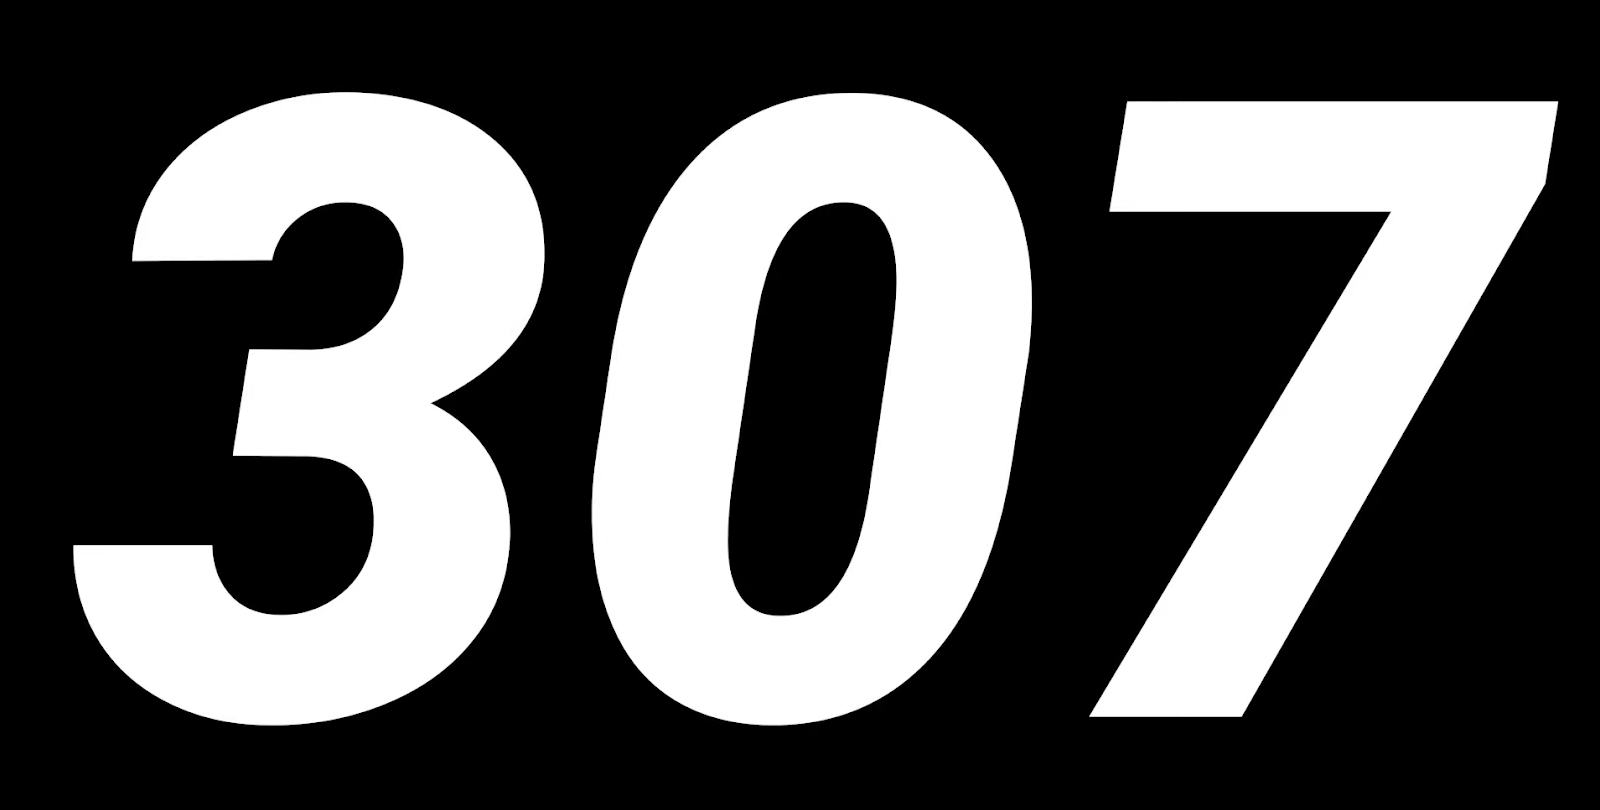 Black text "307" on a white background